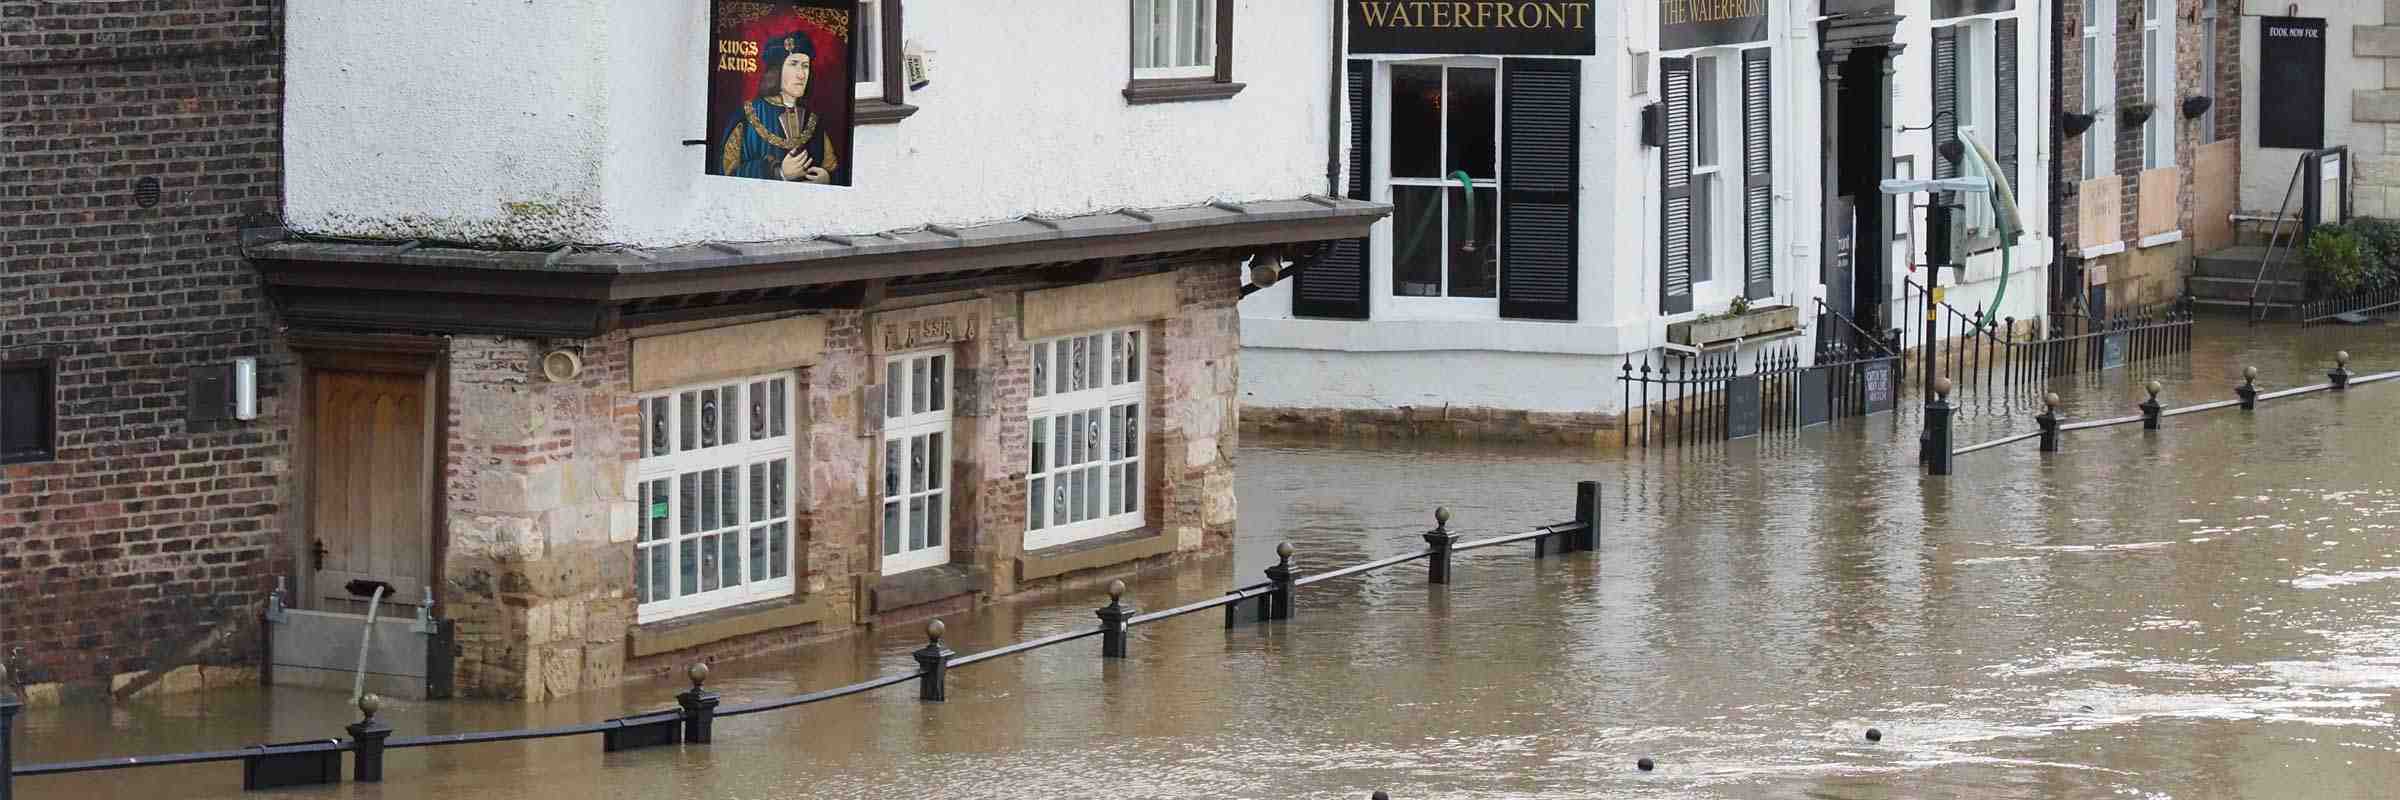 The Kings Arms pub with floodwater up to the windows